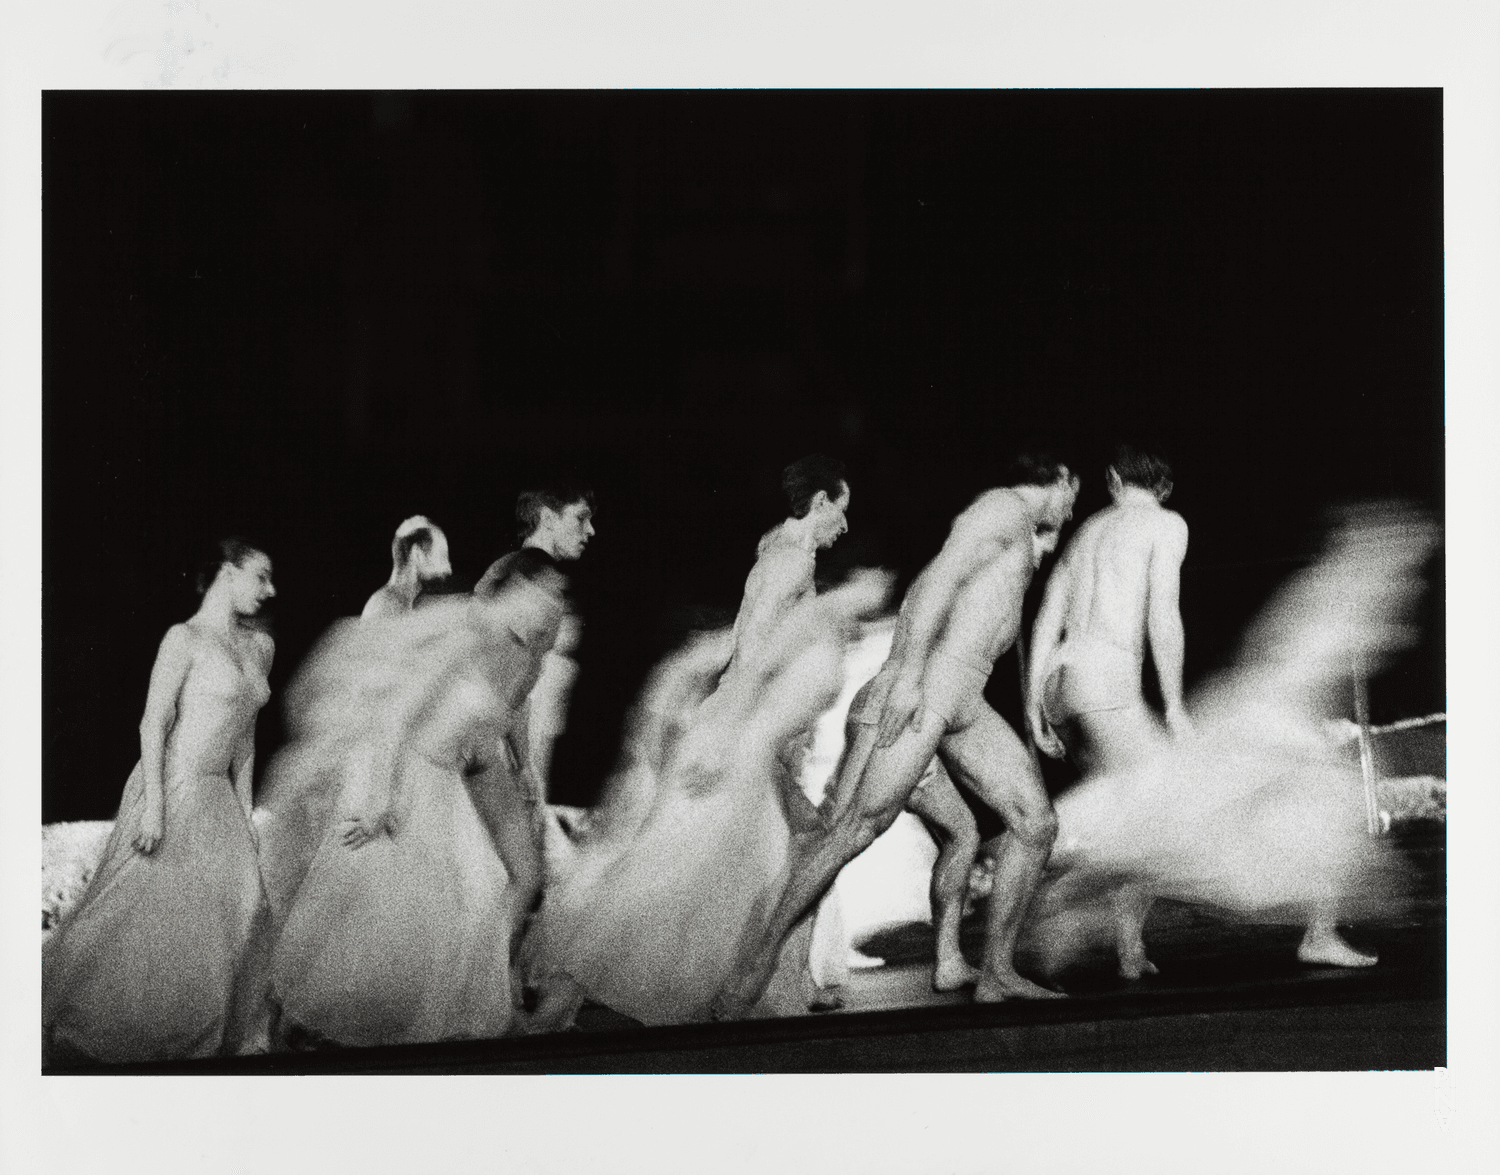 Francis Viet and Thomas Duchatelet in “Orpheus und Eurydike” by Pina Bausch